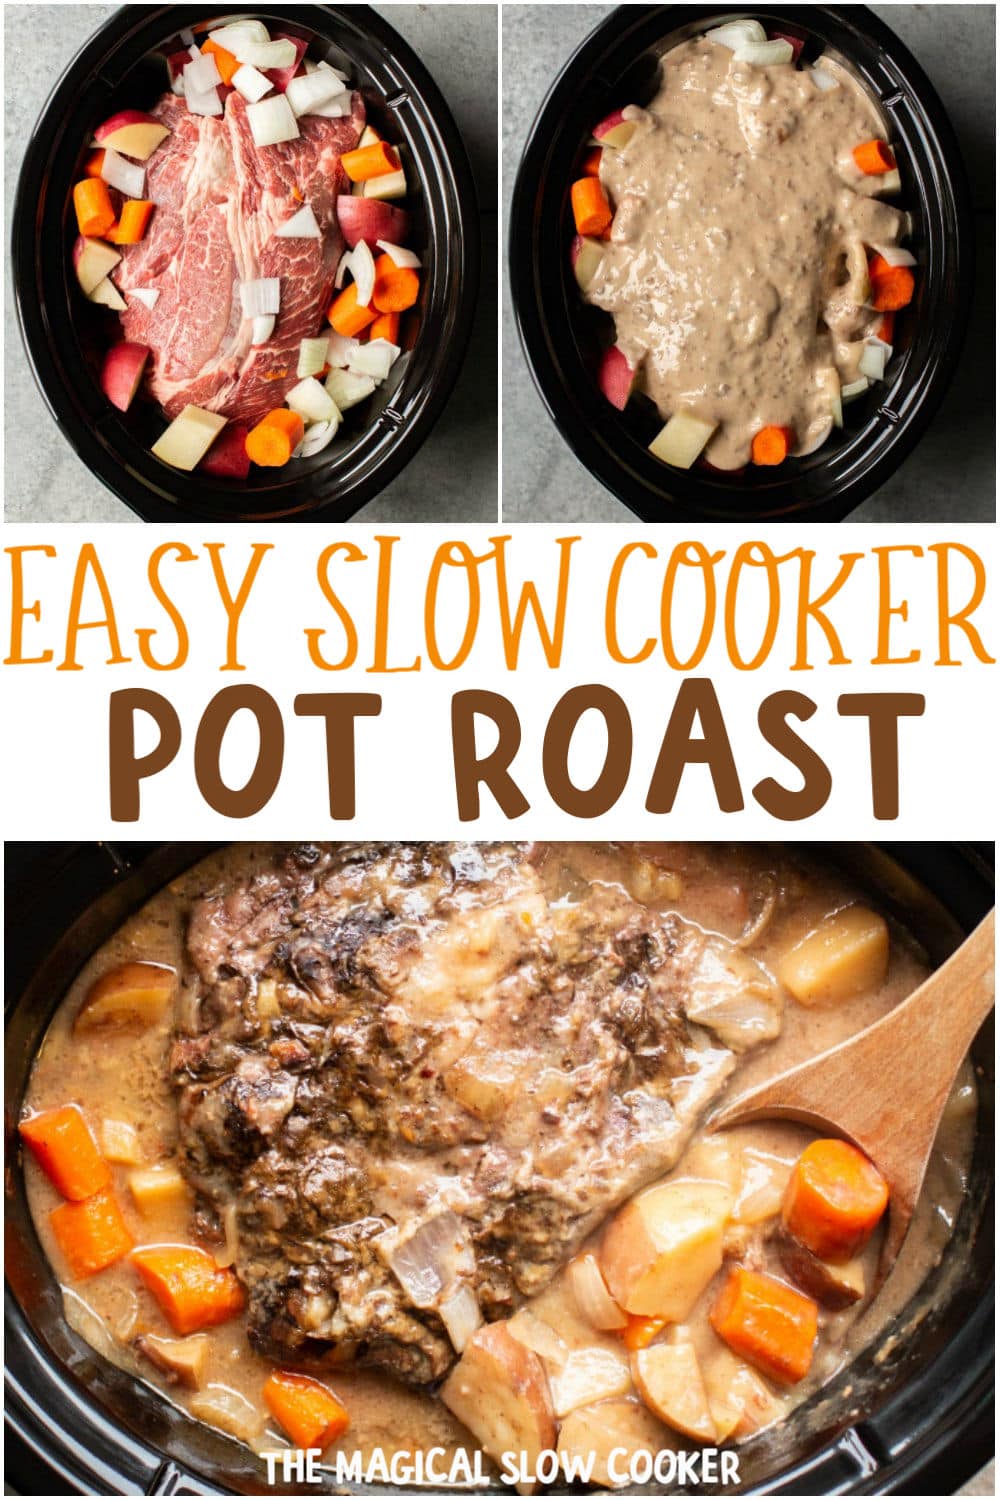 collage of photos of pot roasti n a slow cooker. Text overlay that says: Easy Slow Cooker Pot Roast.